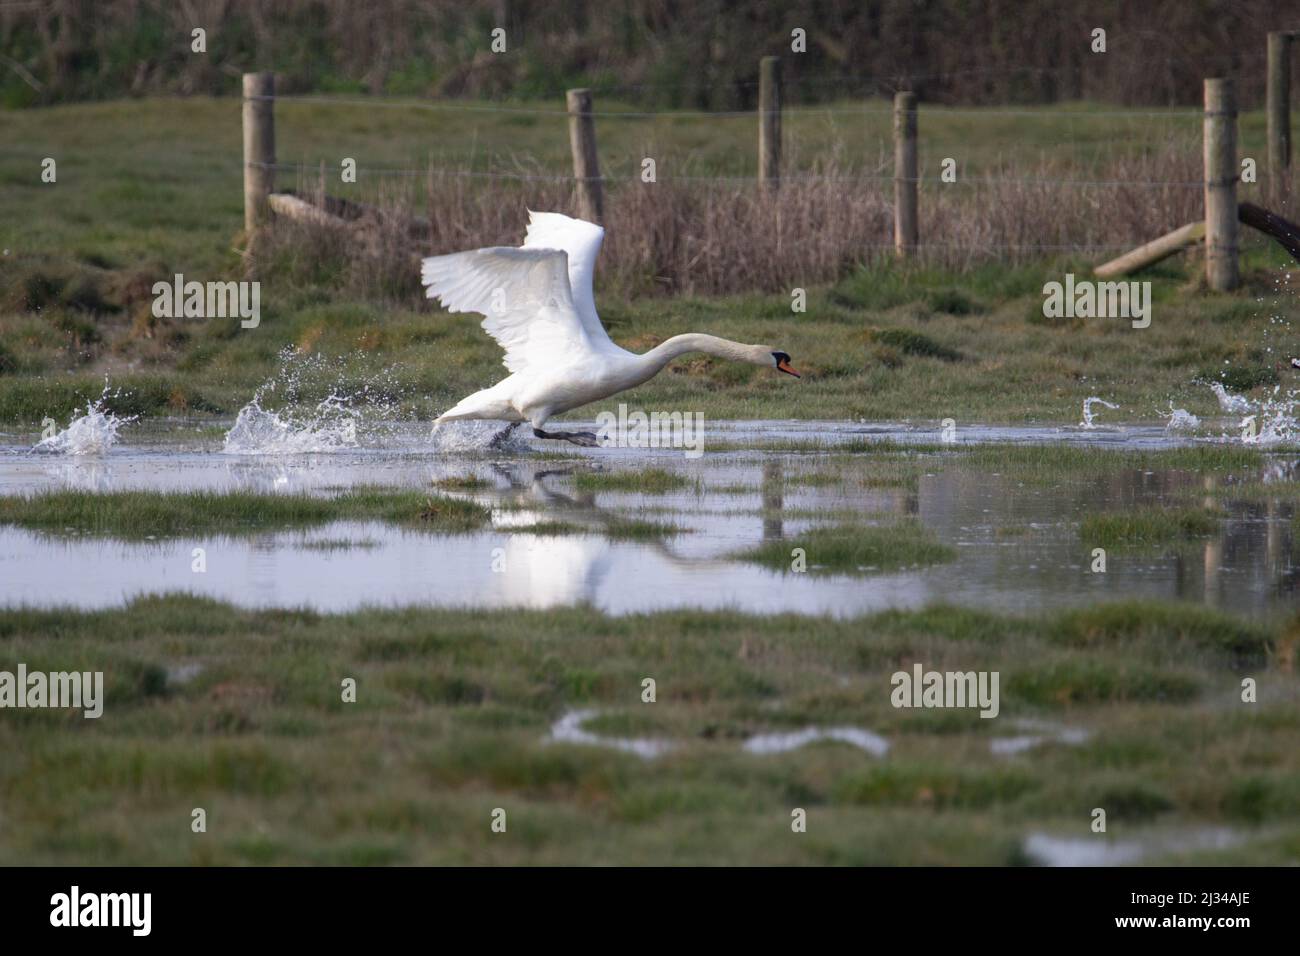 a male Mute Swan (Cygnus olor) taking flight with neck extended from a flooded field with a fence in the background Stock Photo